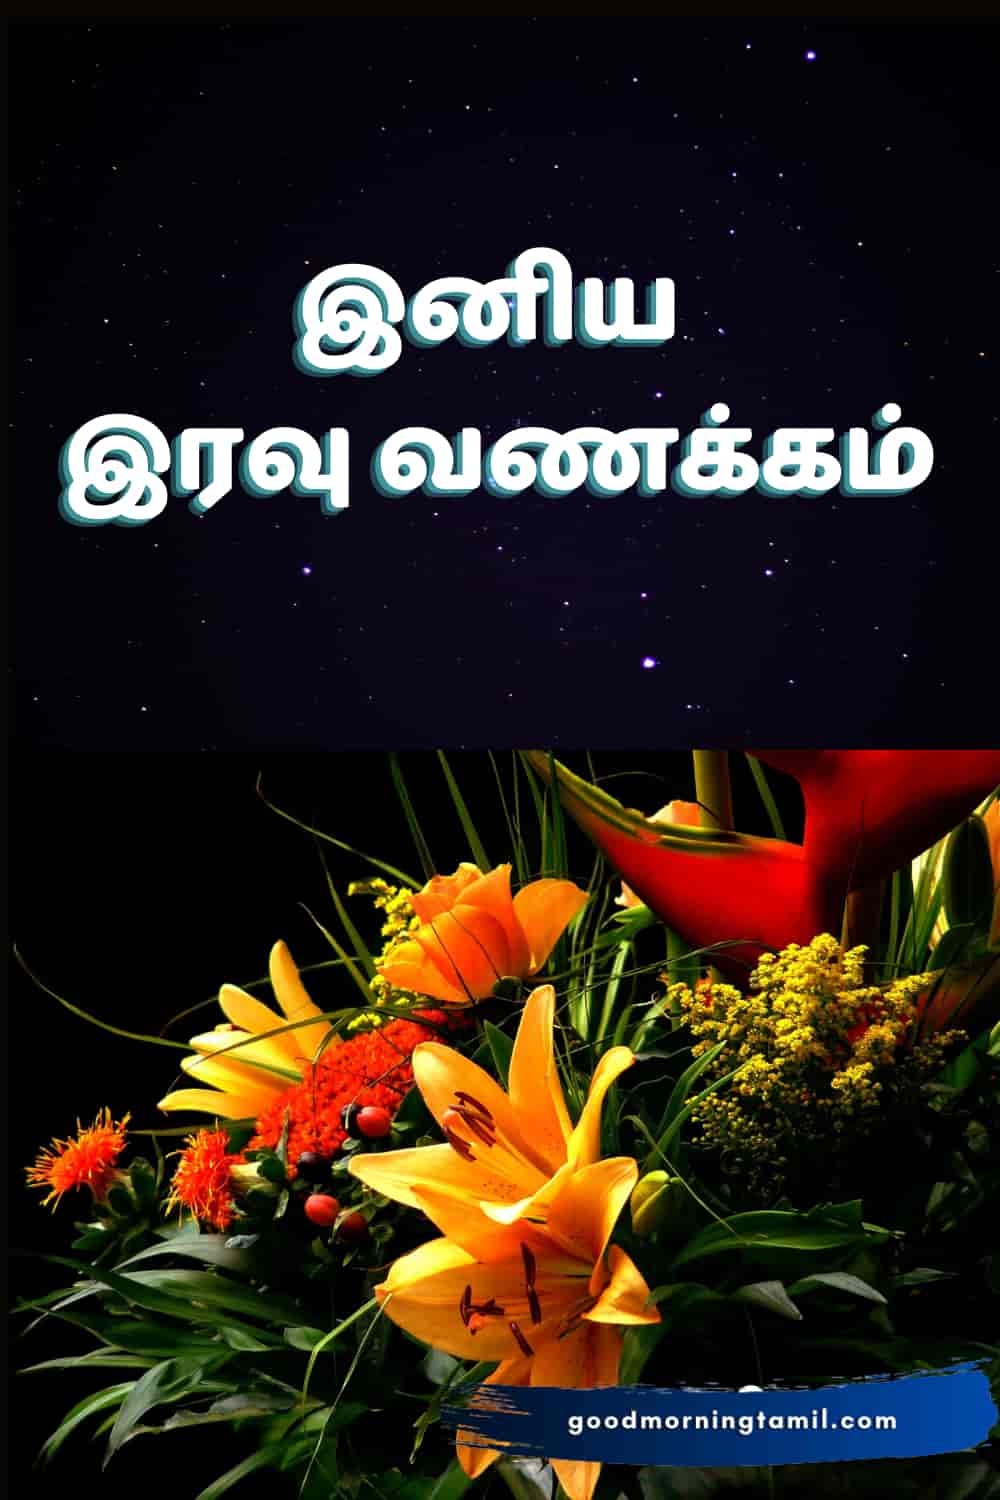 good night wishes in tamil good night messages [10]